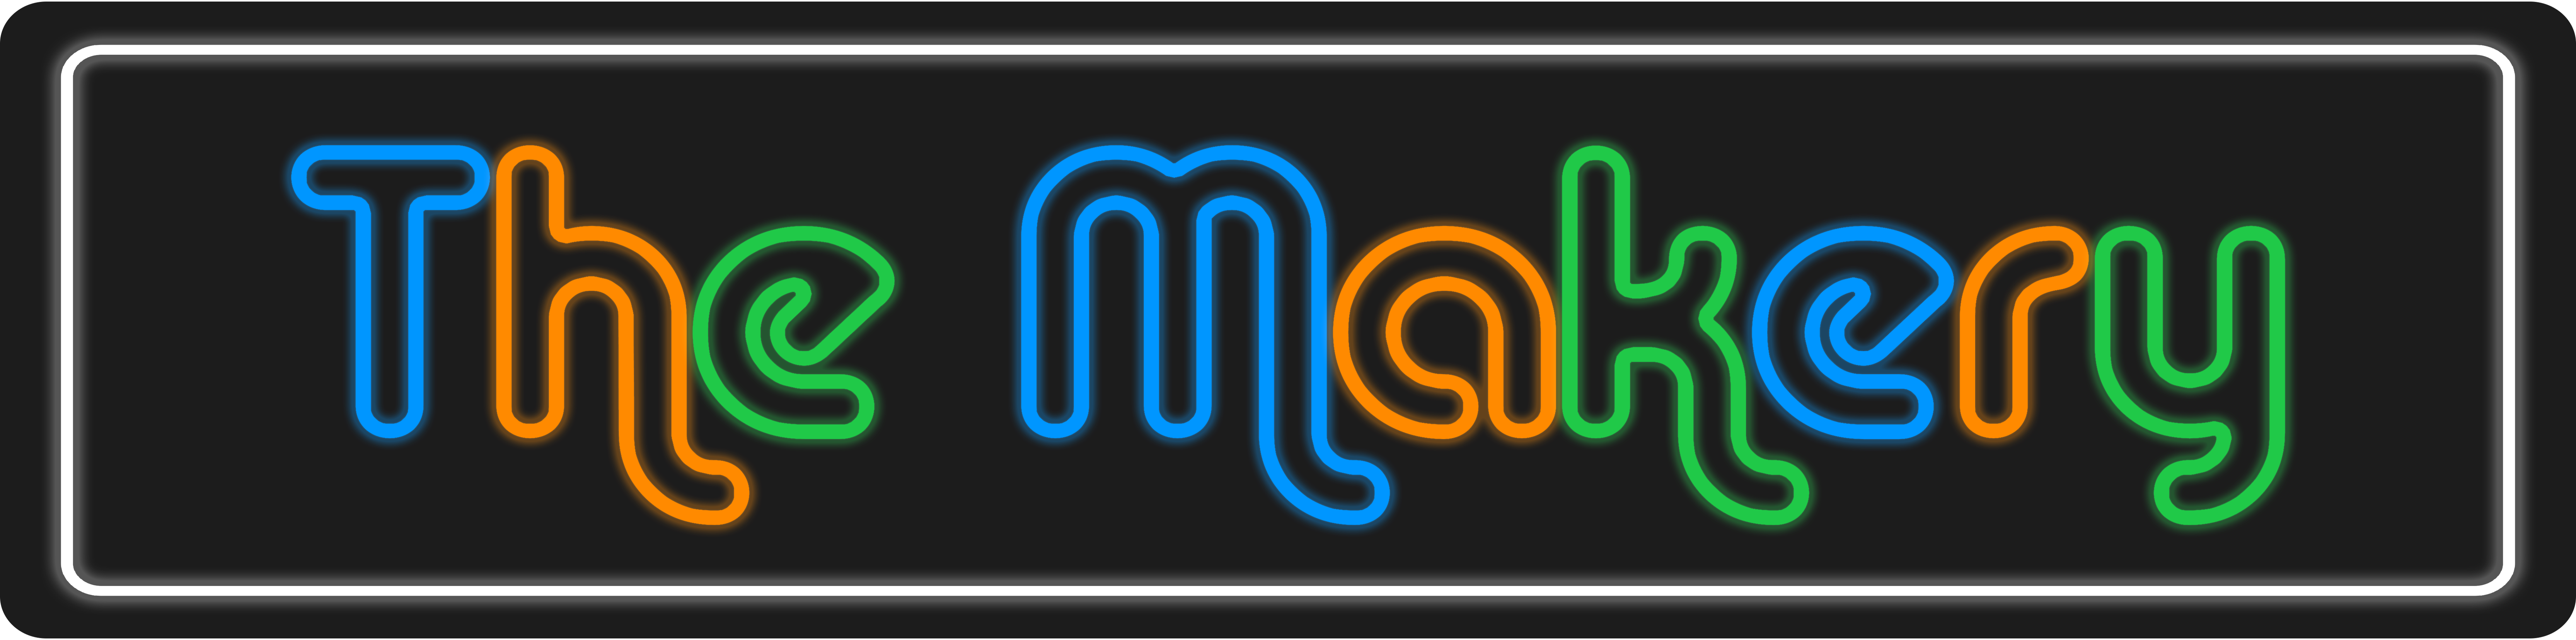 The Makery Banner